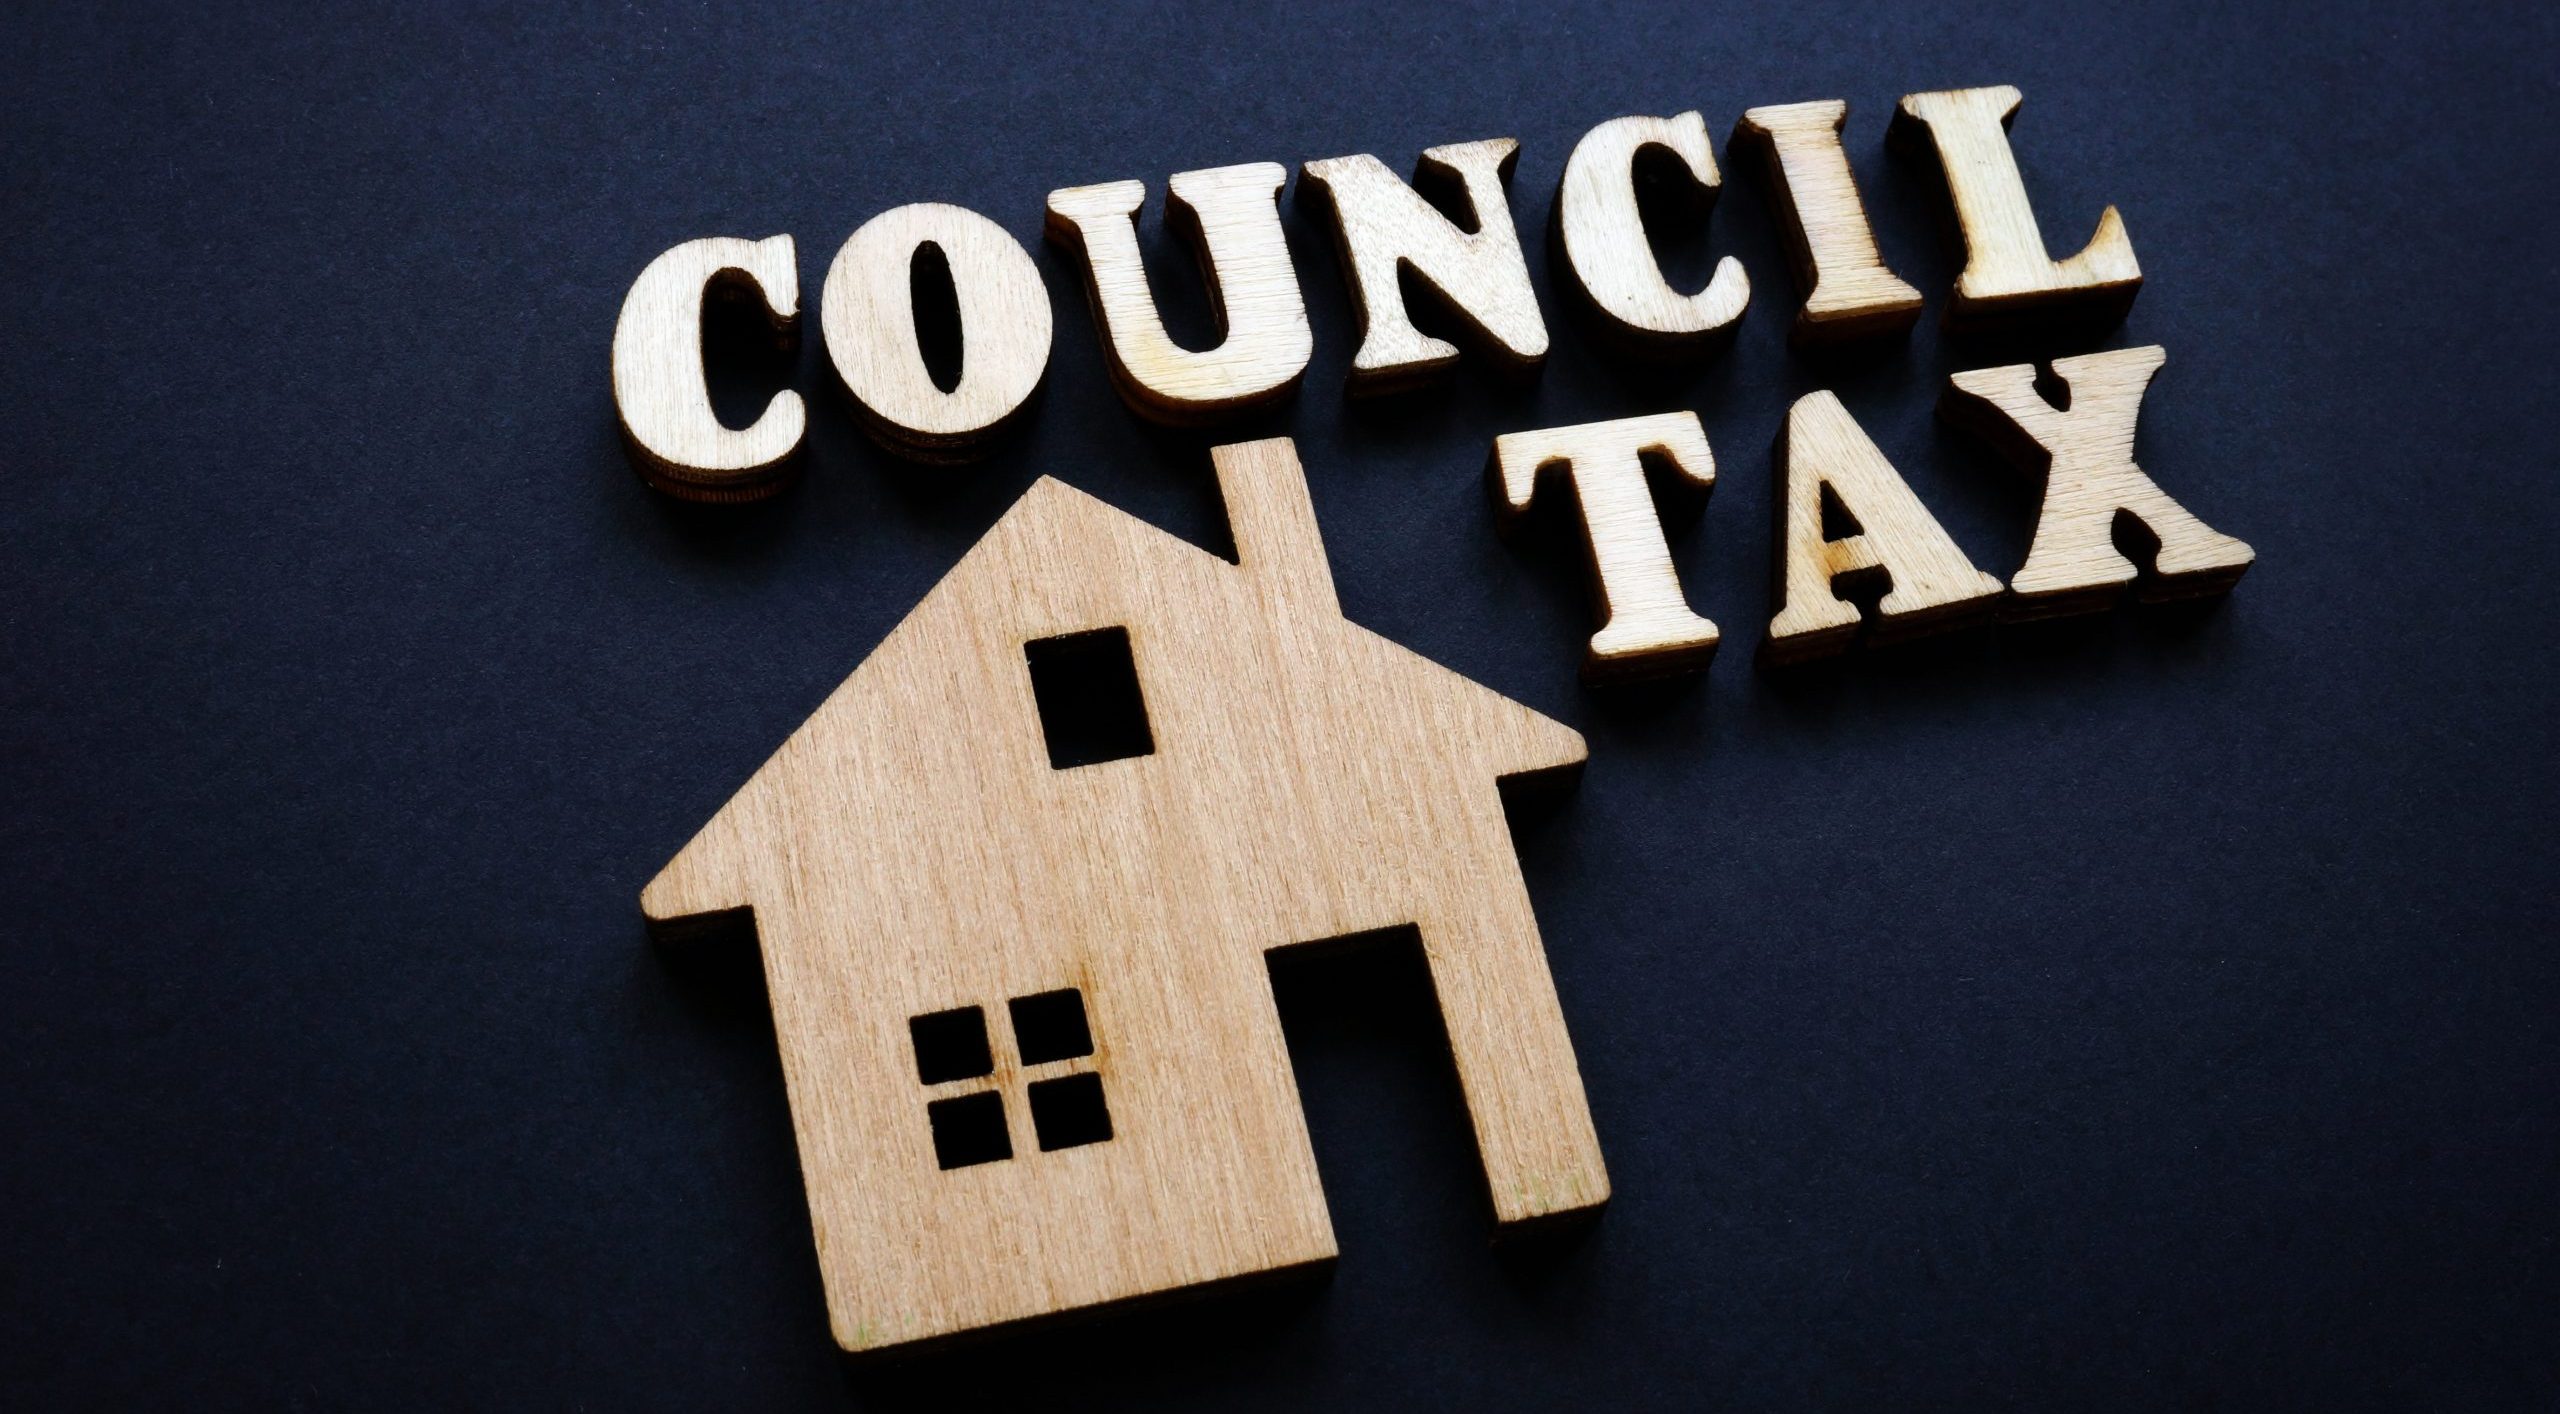 Tendring Council Tax Email